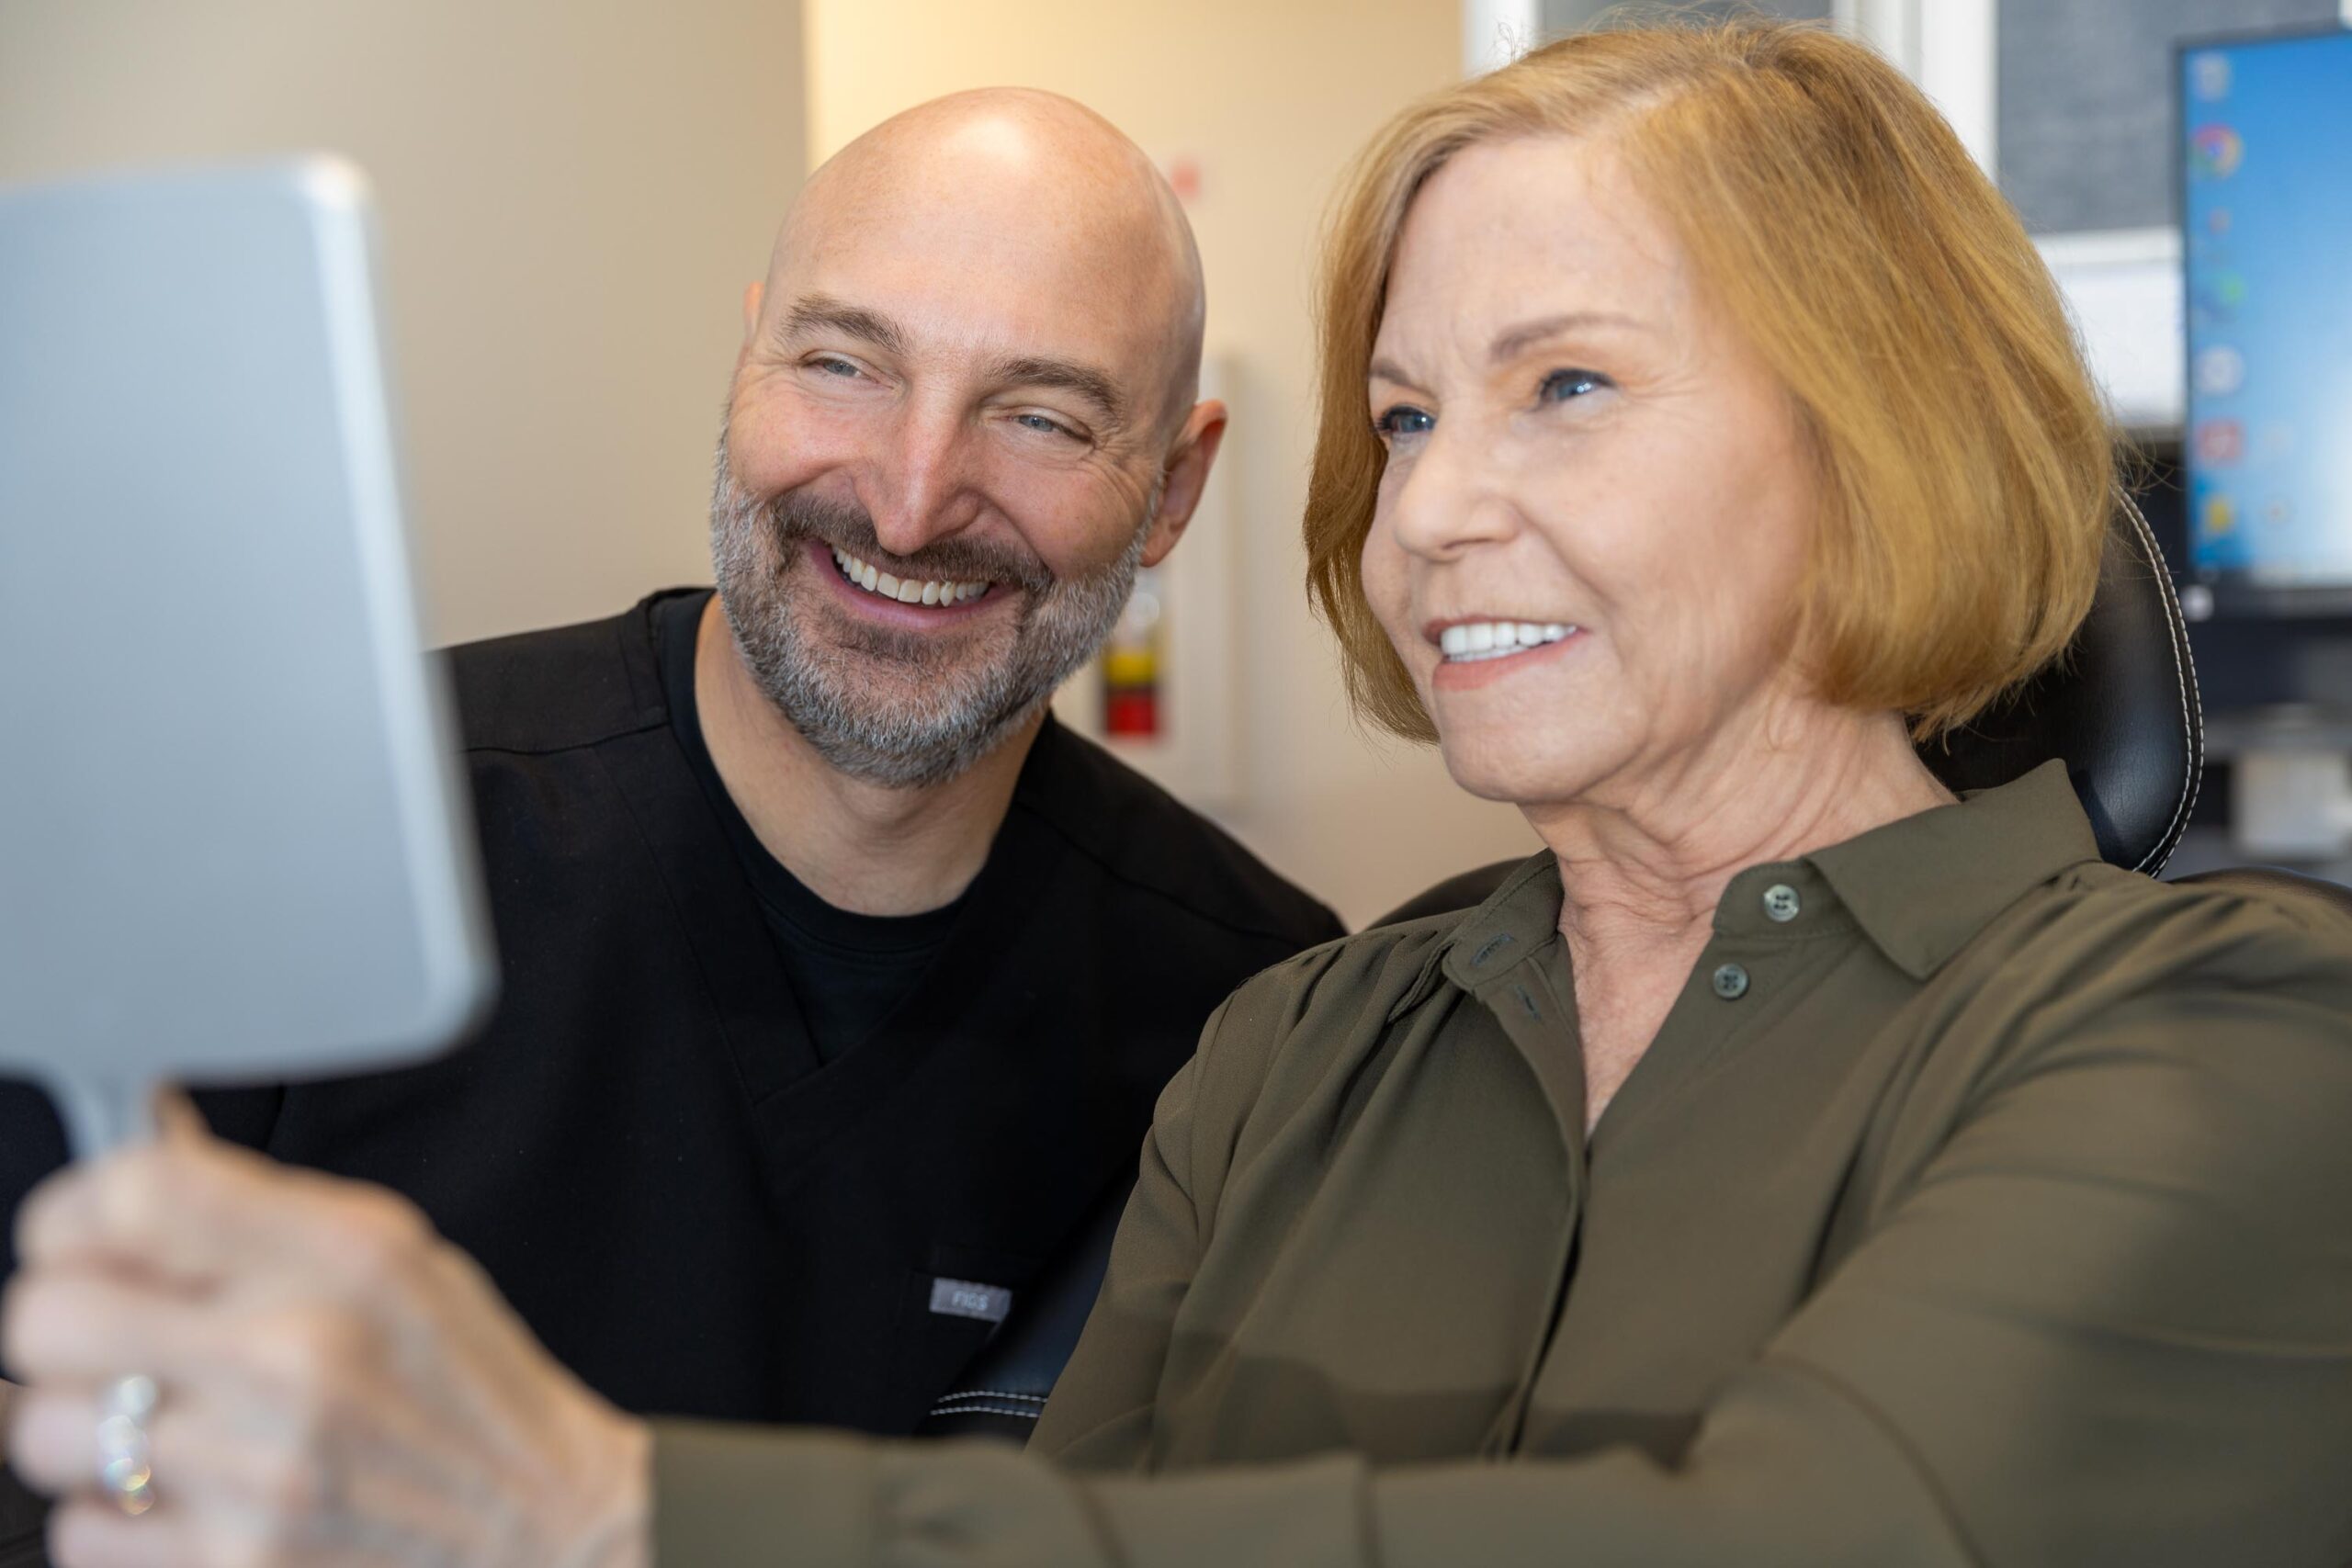 Dr. Fetsch and his patient smiling at her reflection in a hand held mirror after her full mouth dental implant procedure.